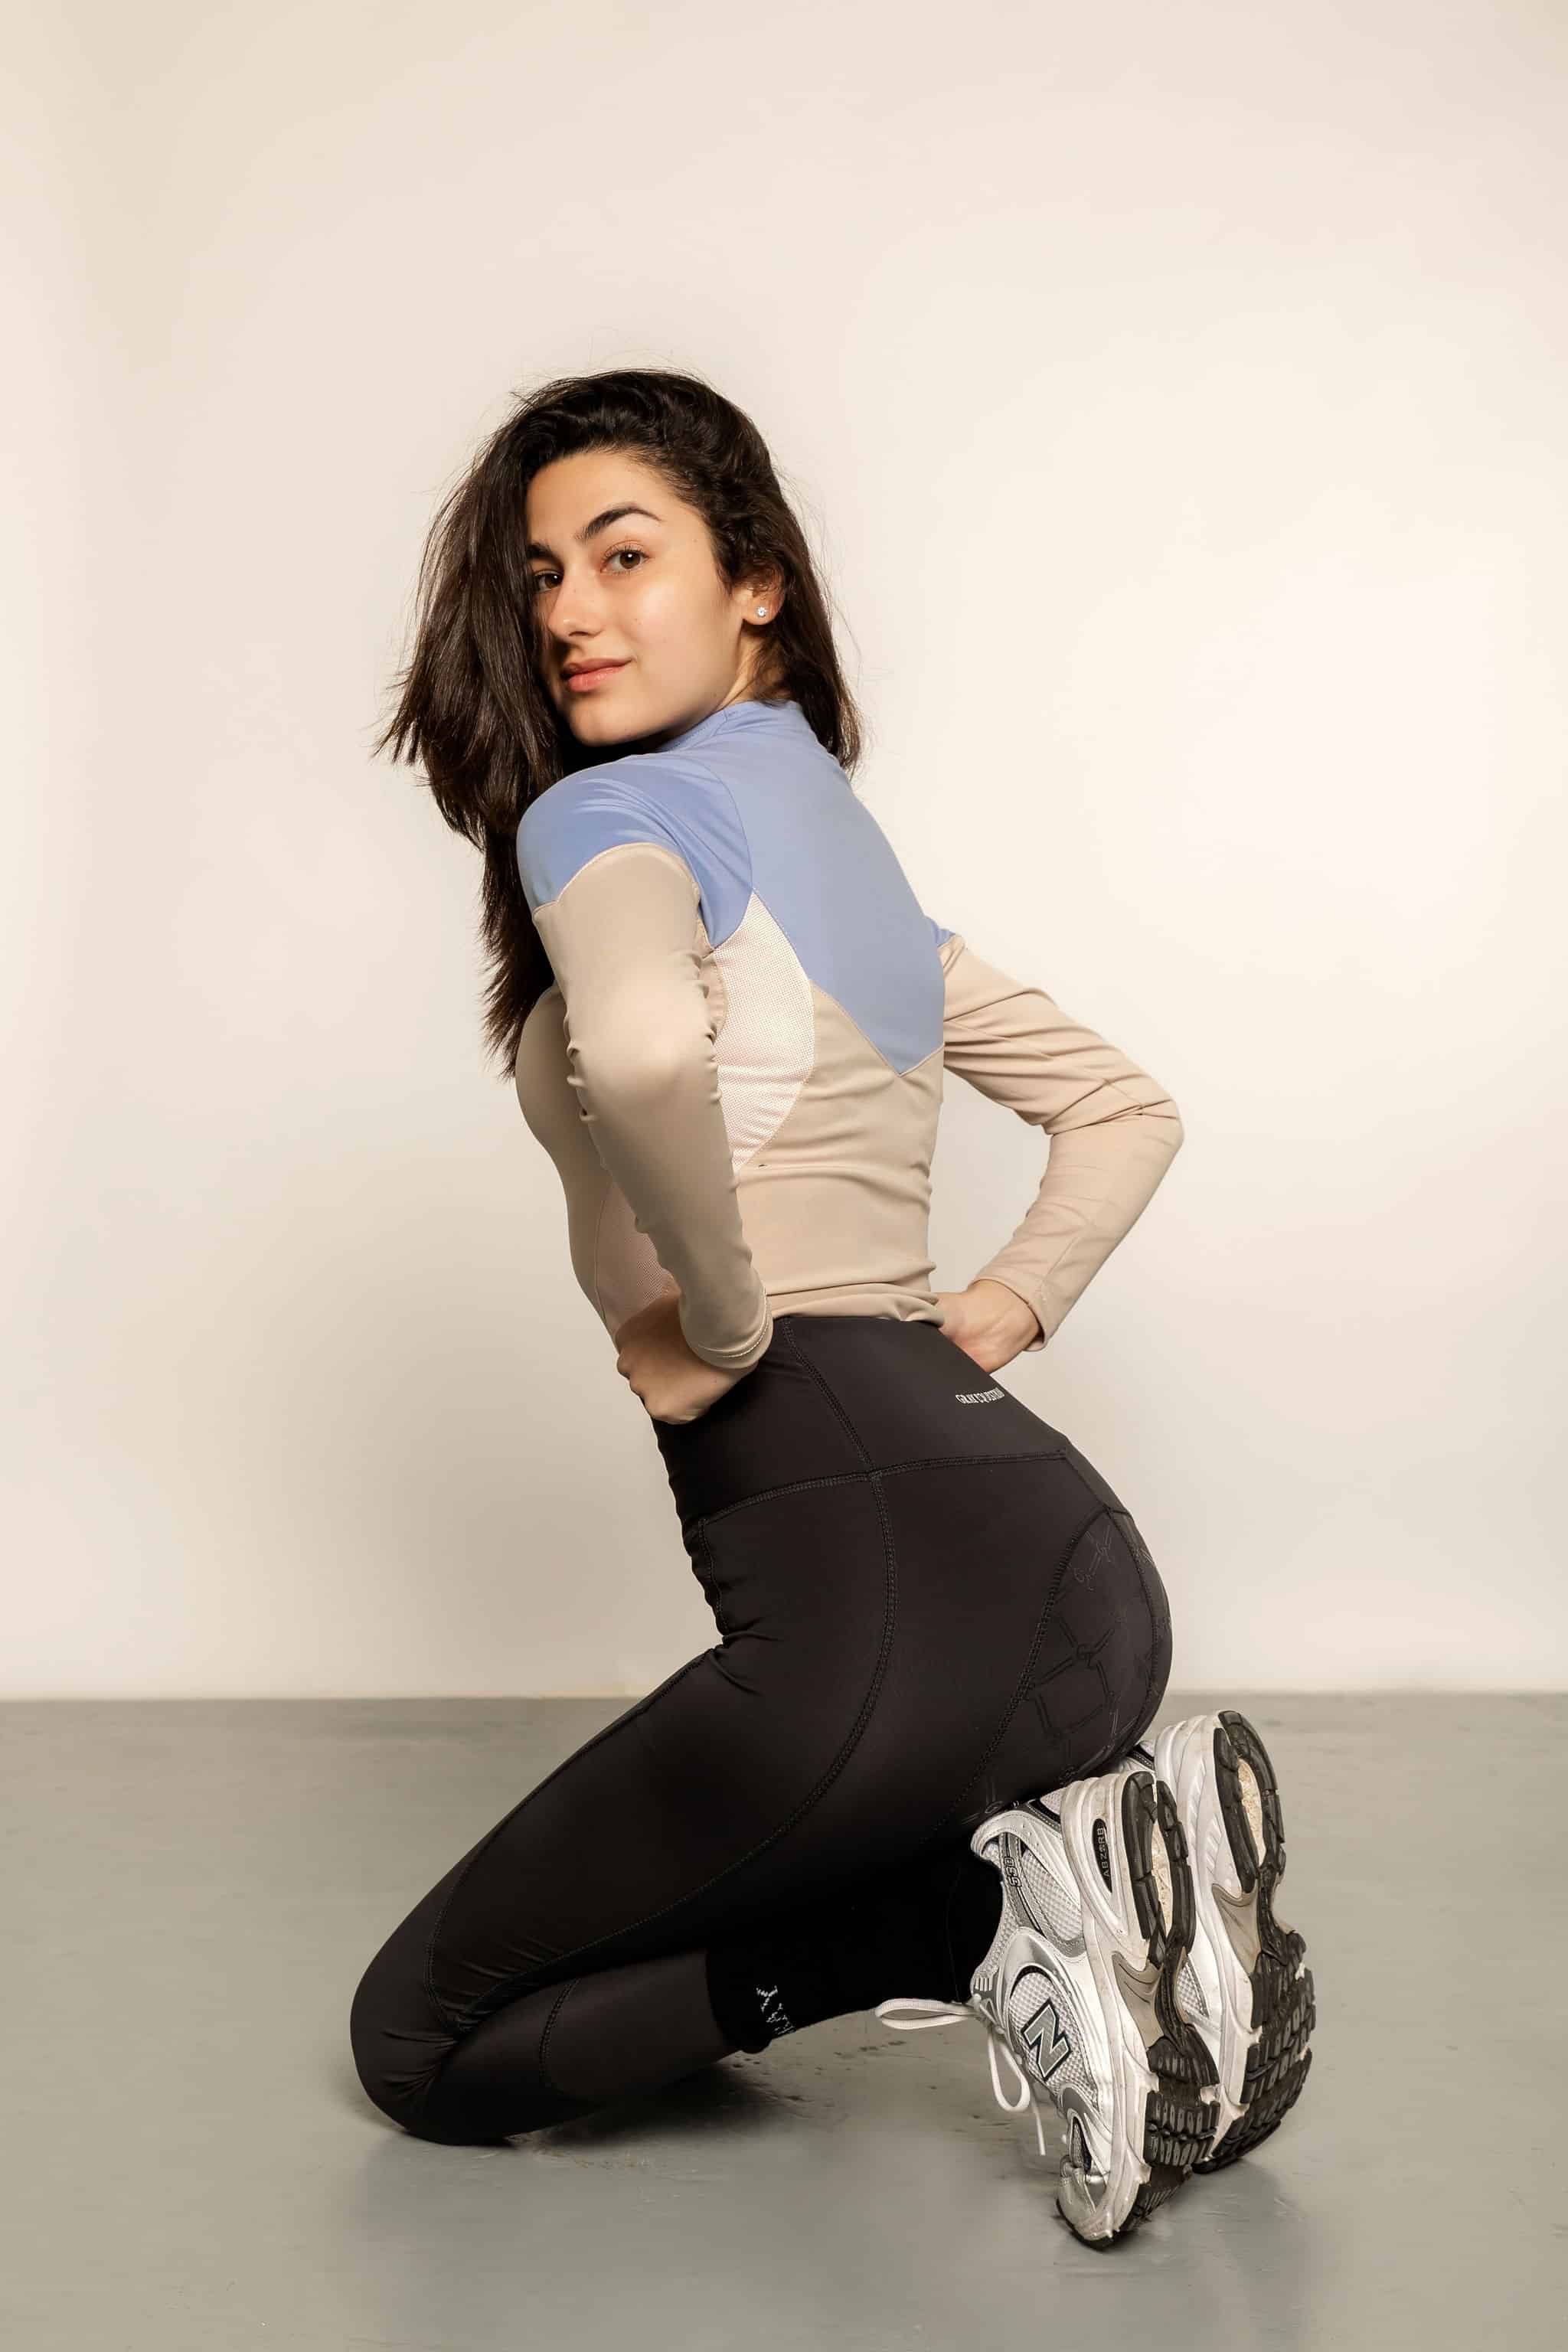 Model leaning down wearing blue & beige base layer with with black leggings.